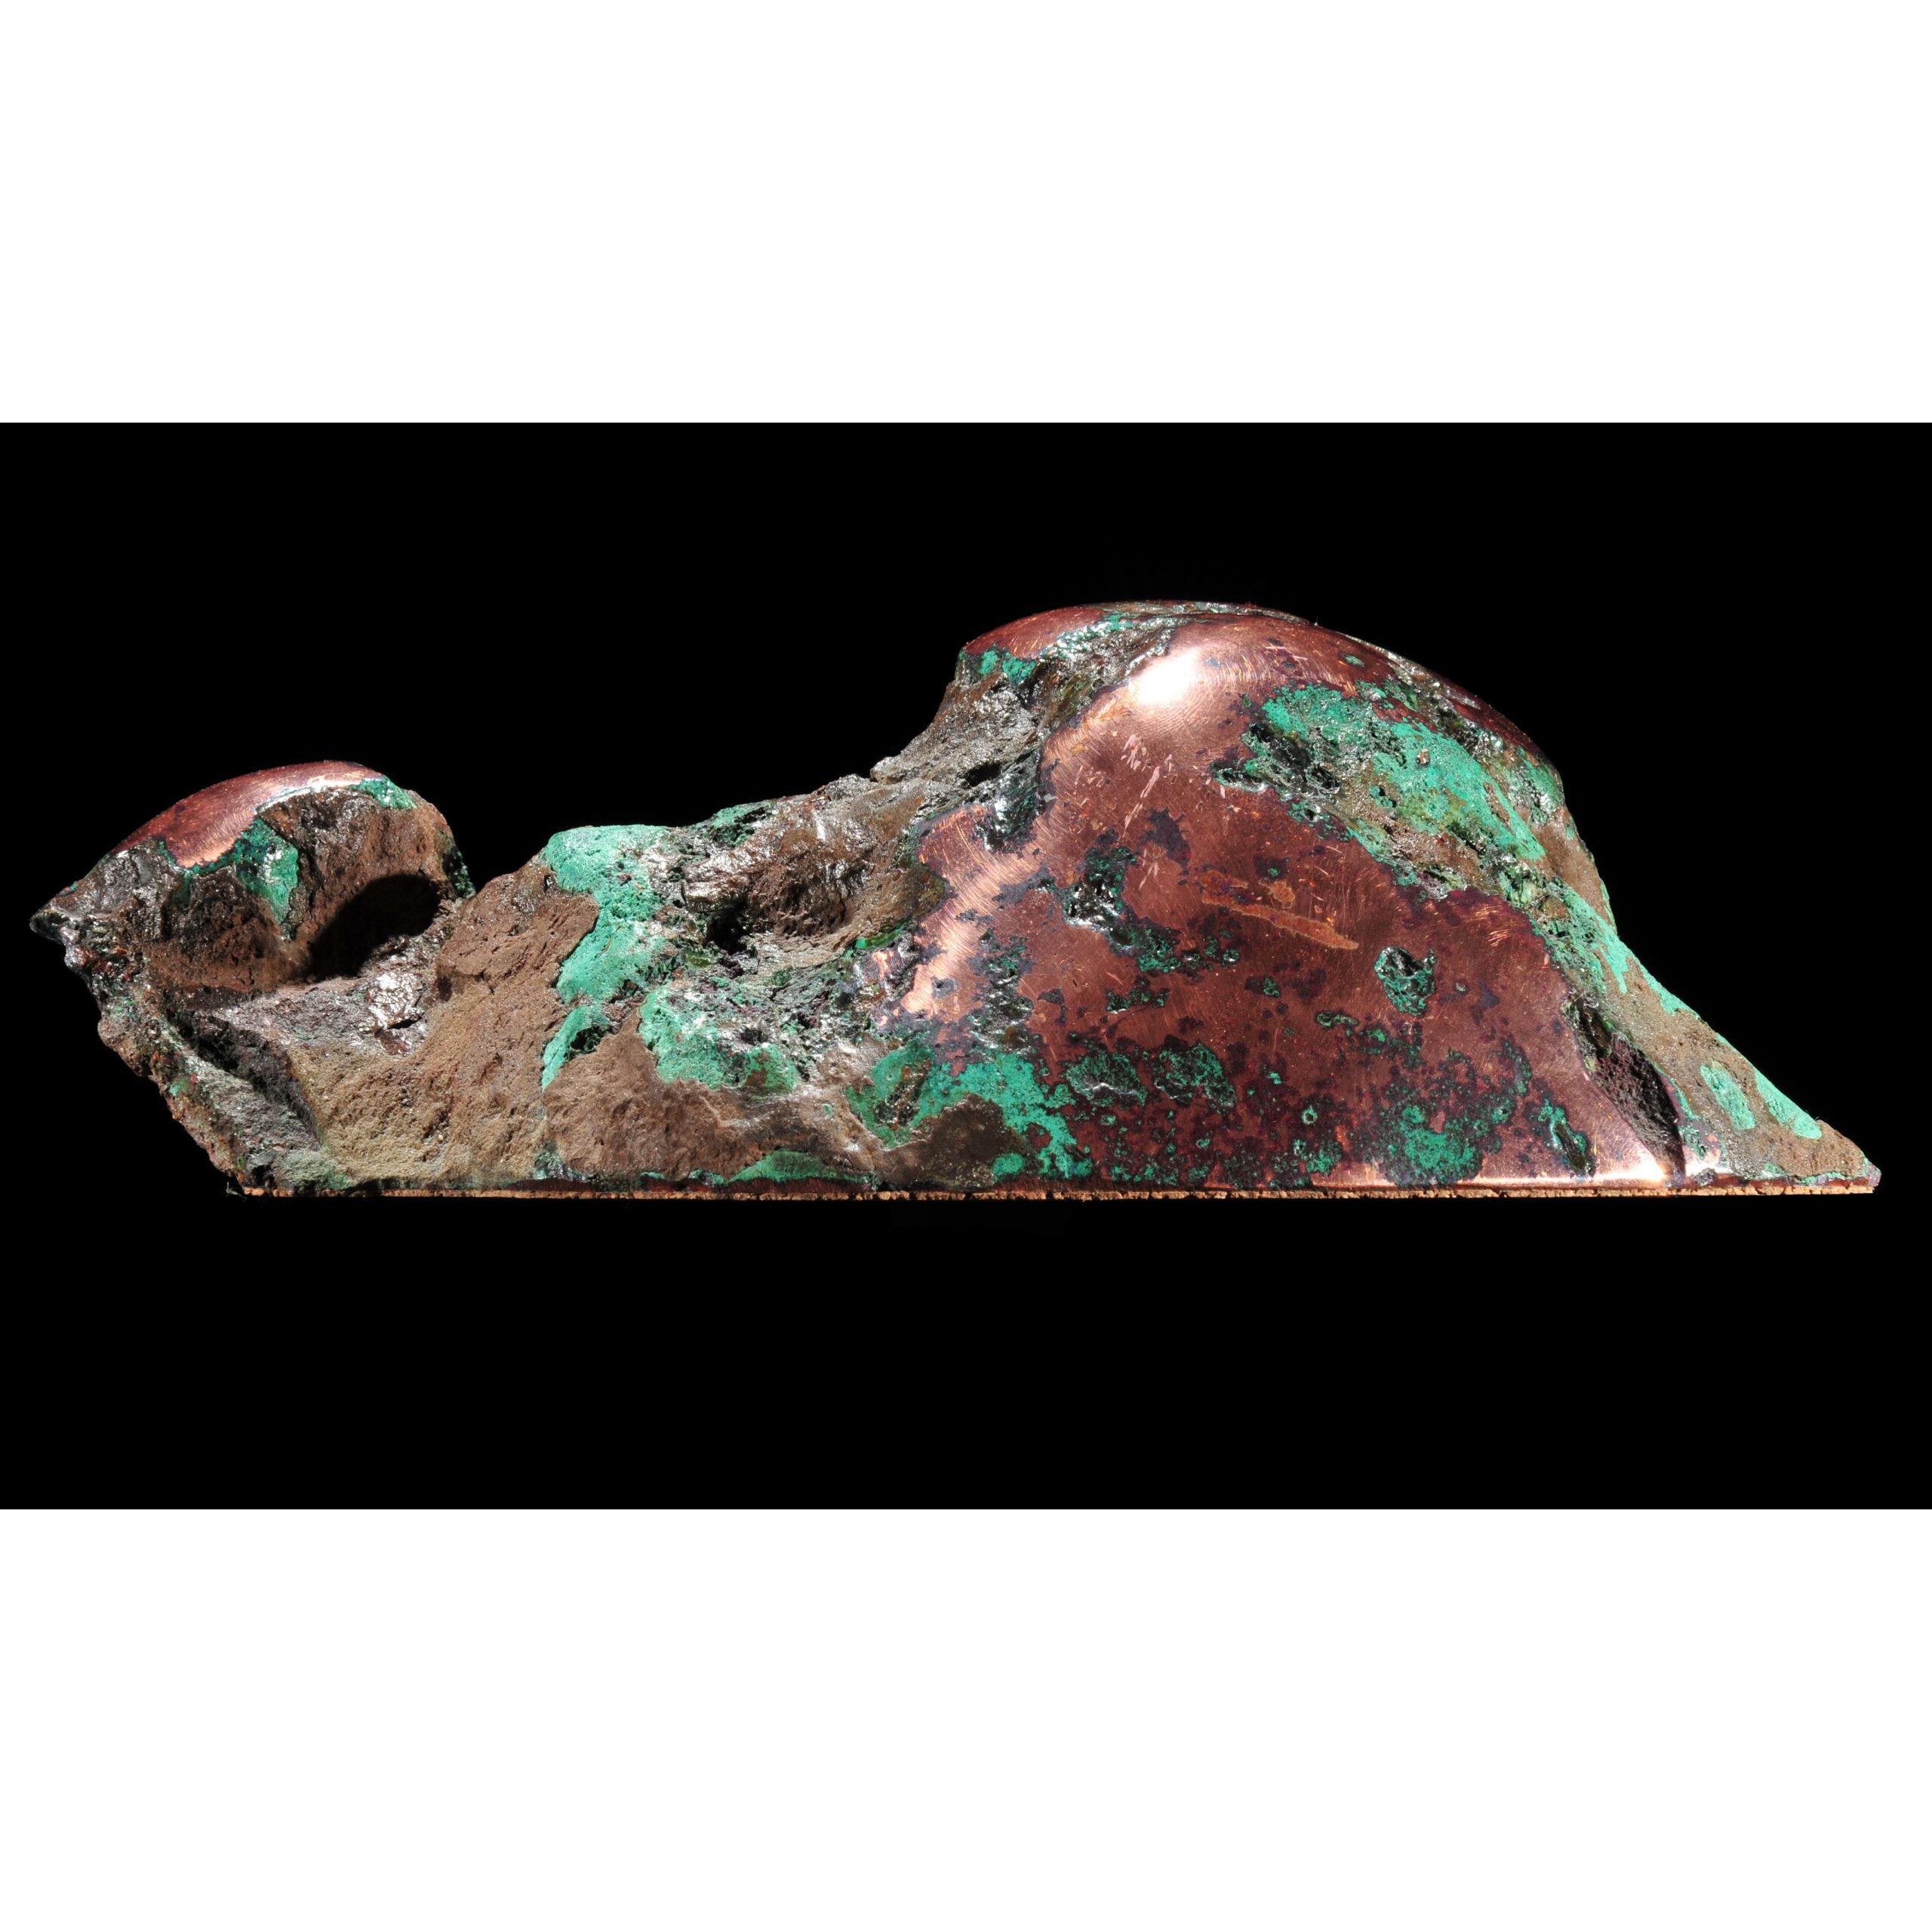 This is a picture of a piece of polished copper, exhibiting quite a bit of oxidization.